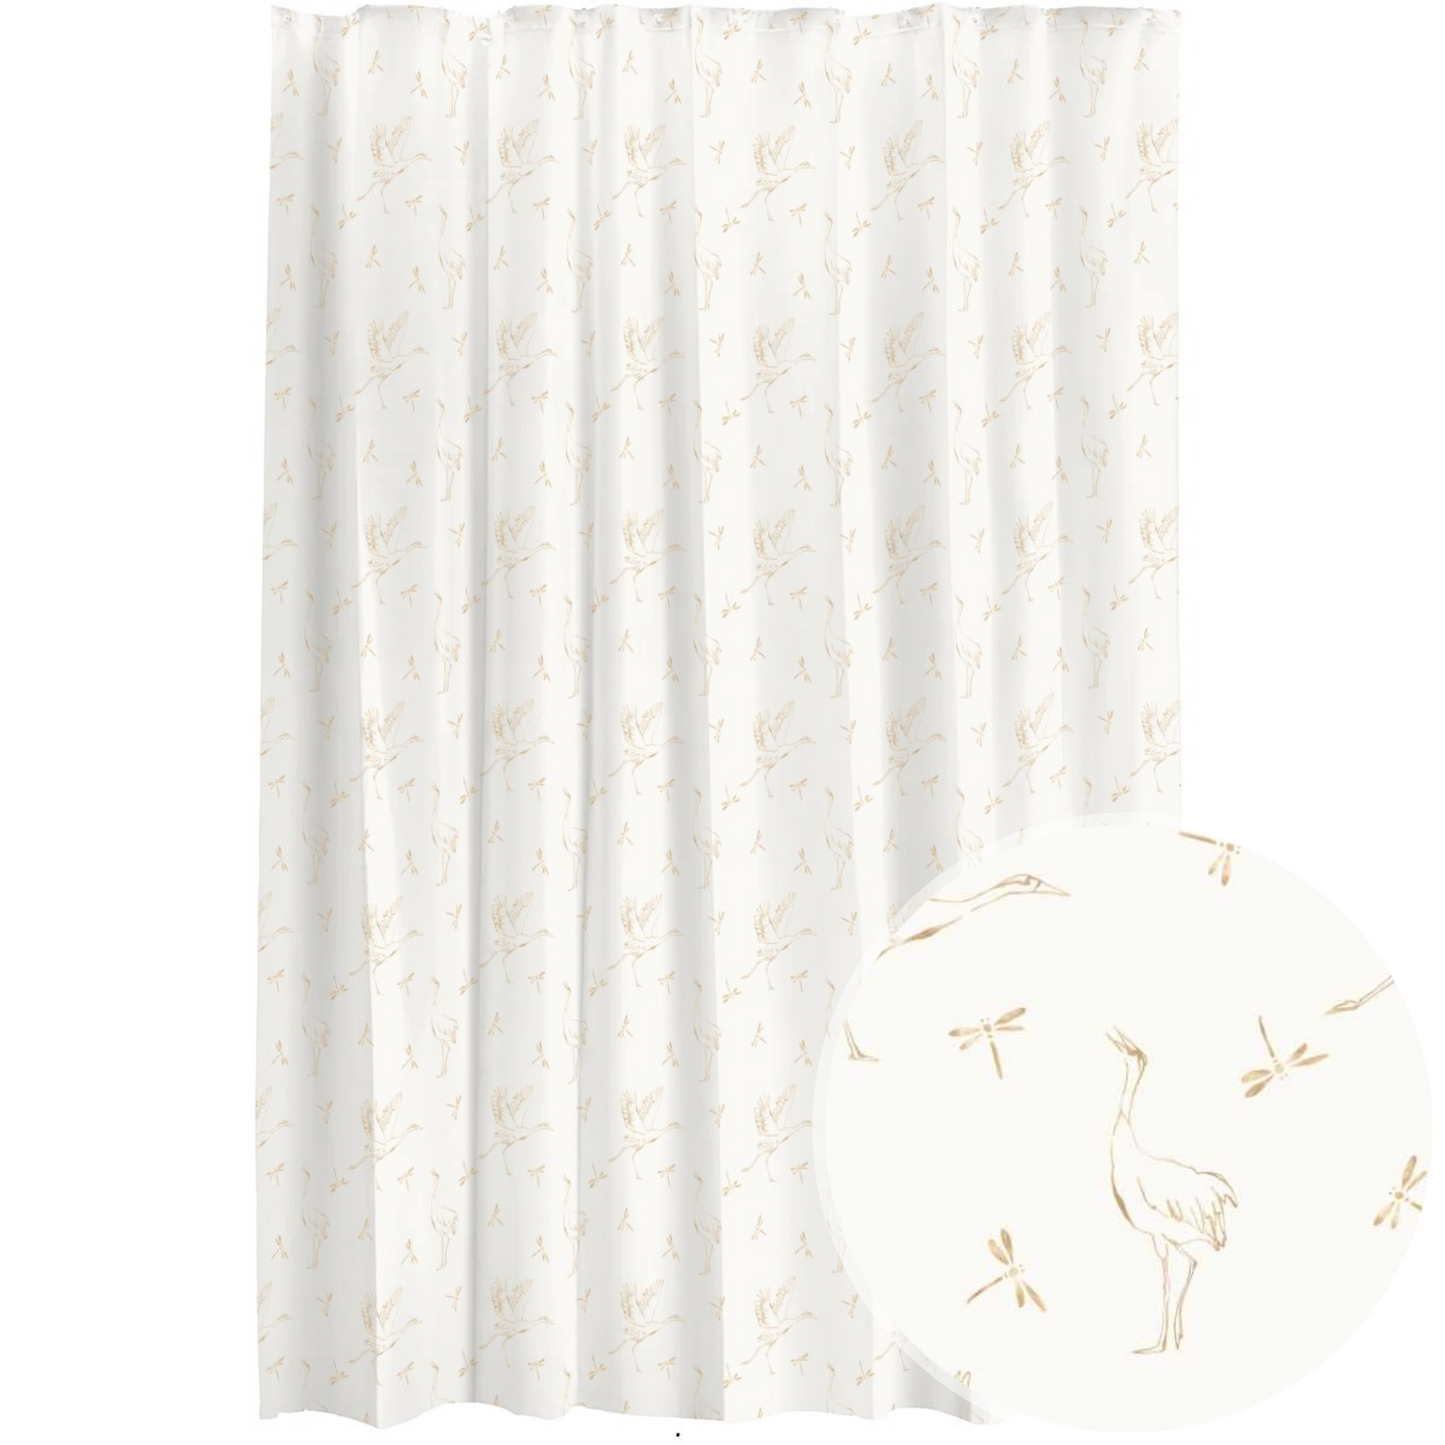 Golden Stork and Dragonfly Shower Curtain